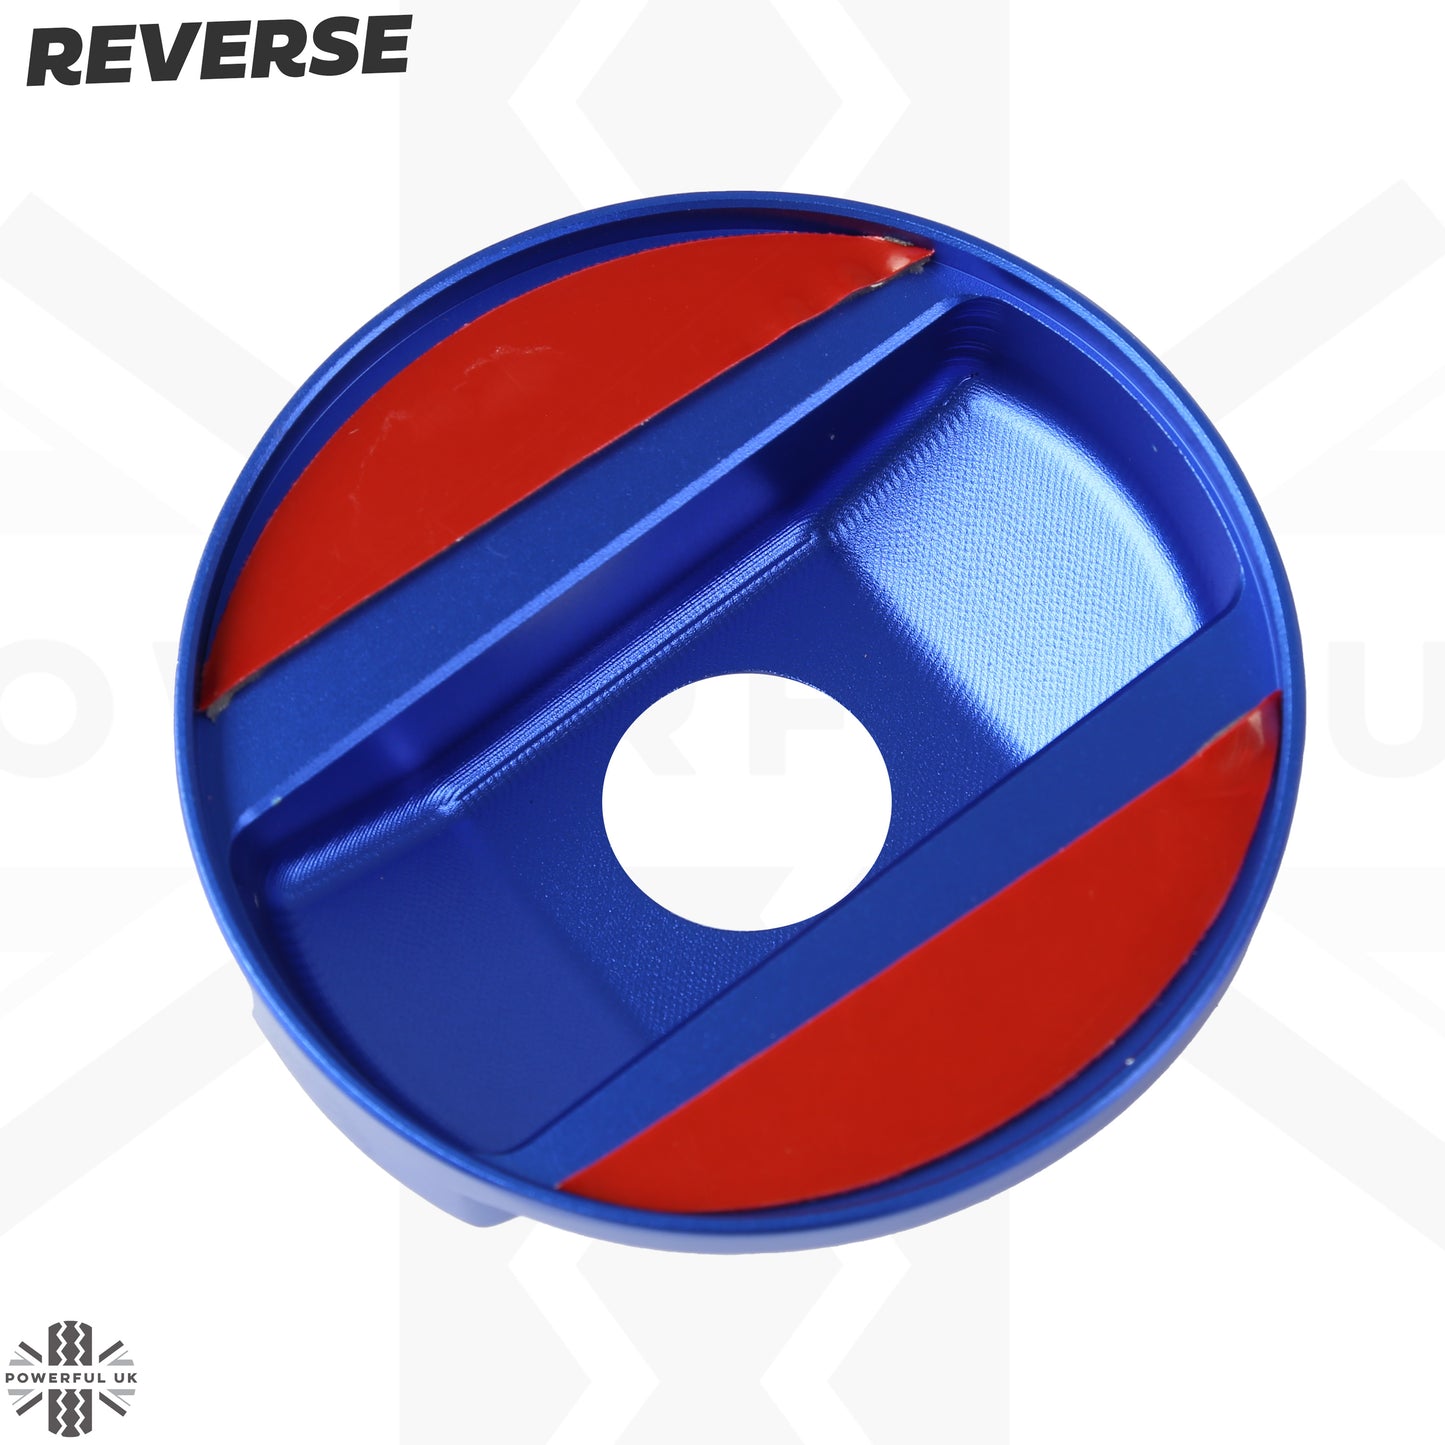 Alloy Fuel Cap Cover - Blue - for Land Rover Defender (Classic) 1998+